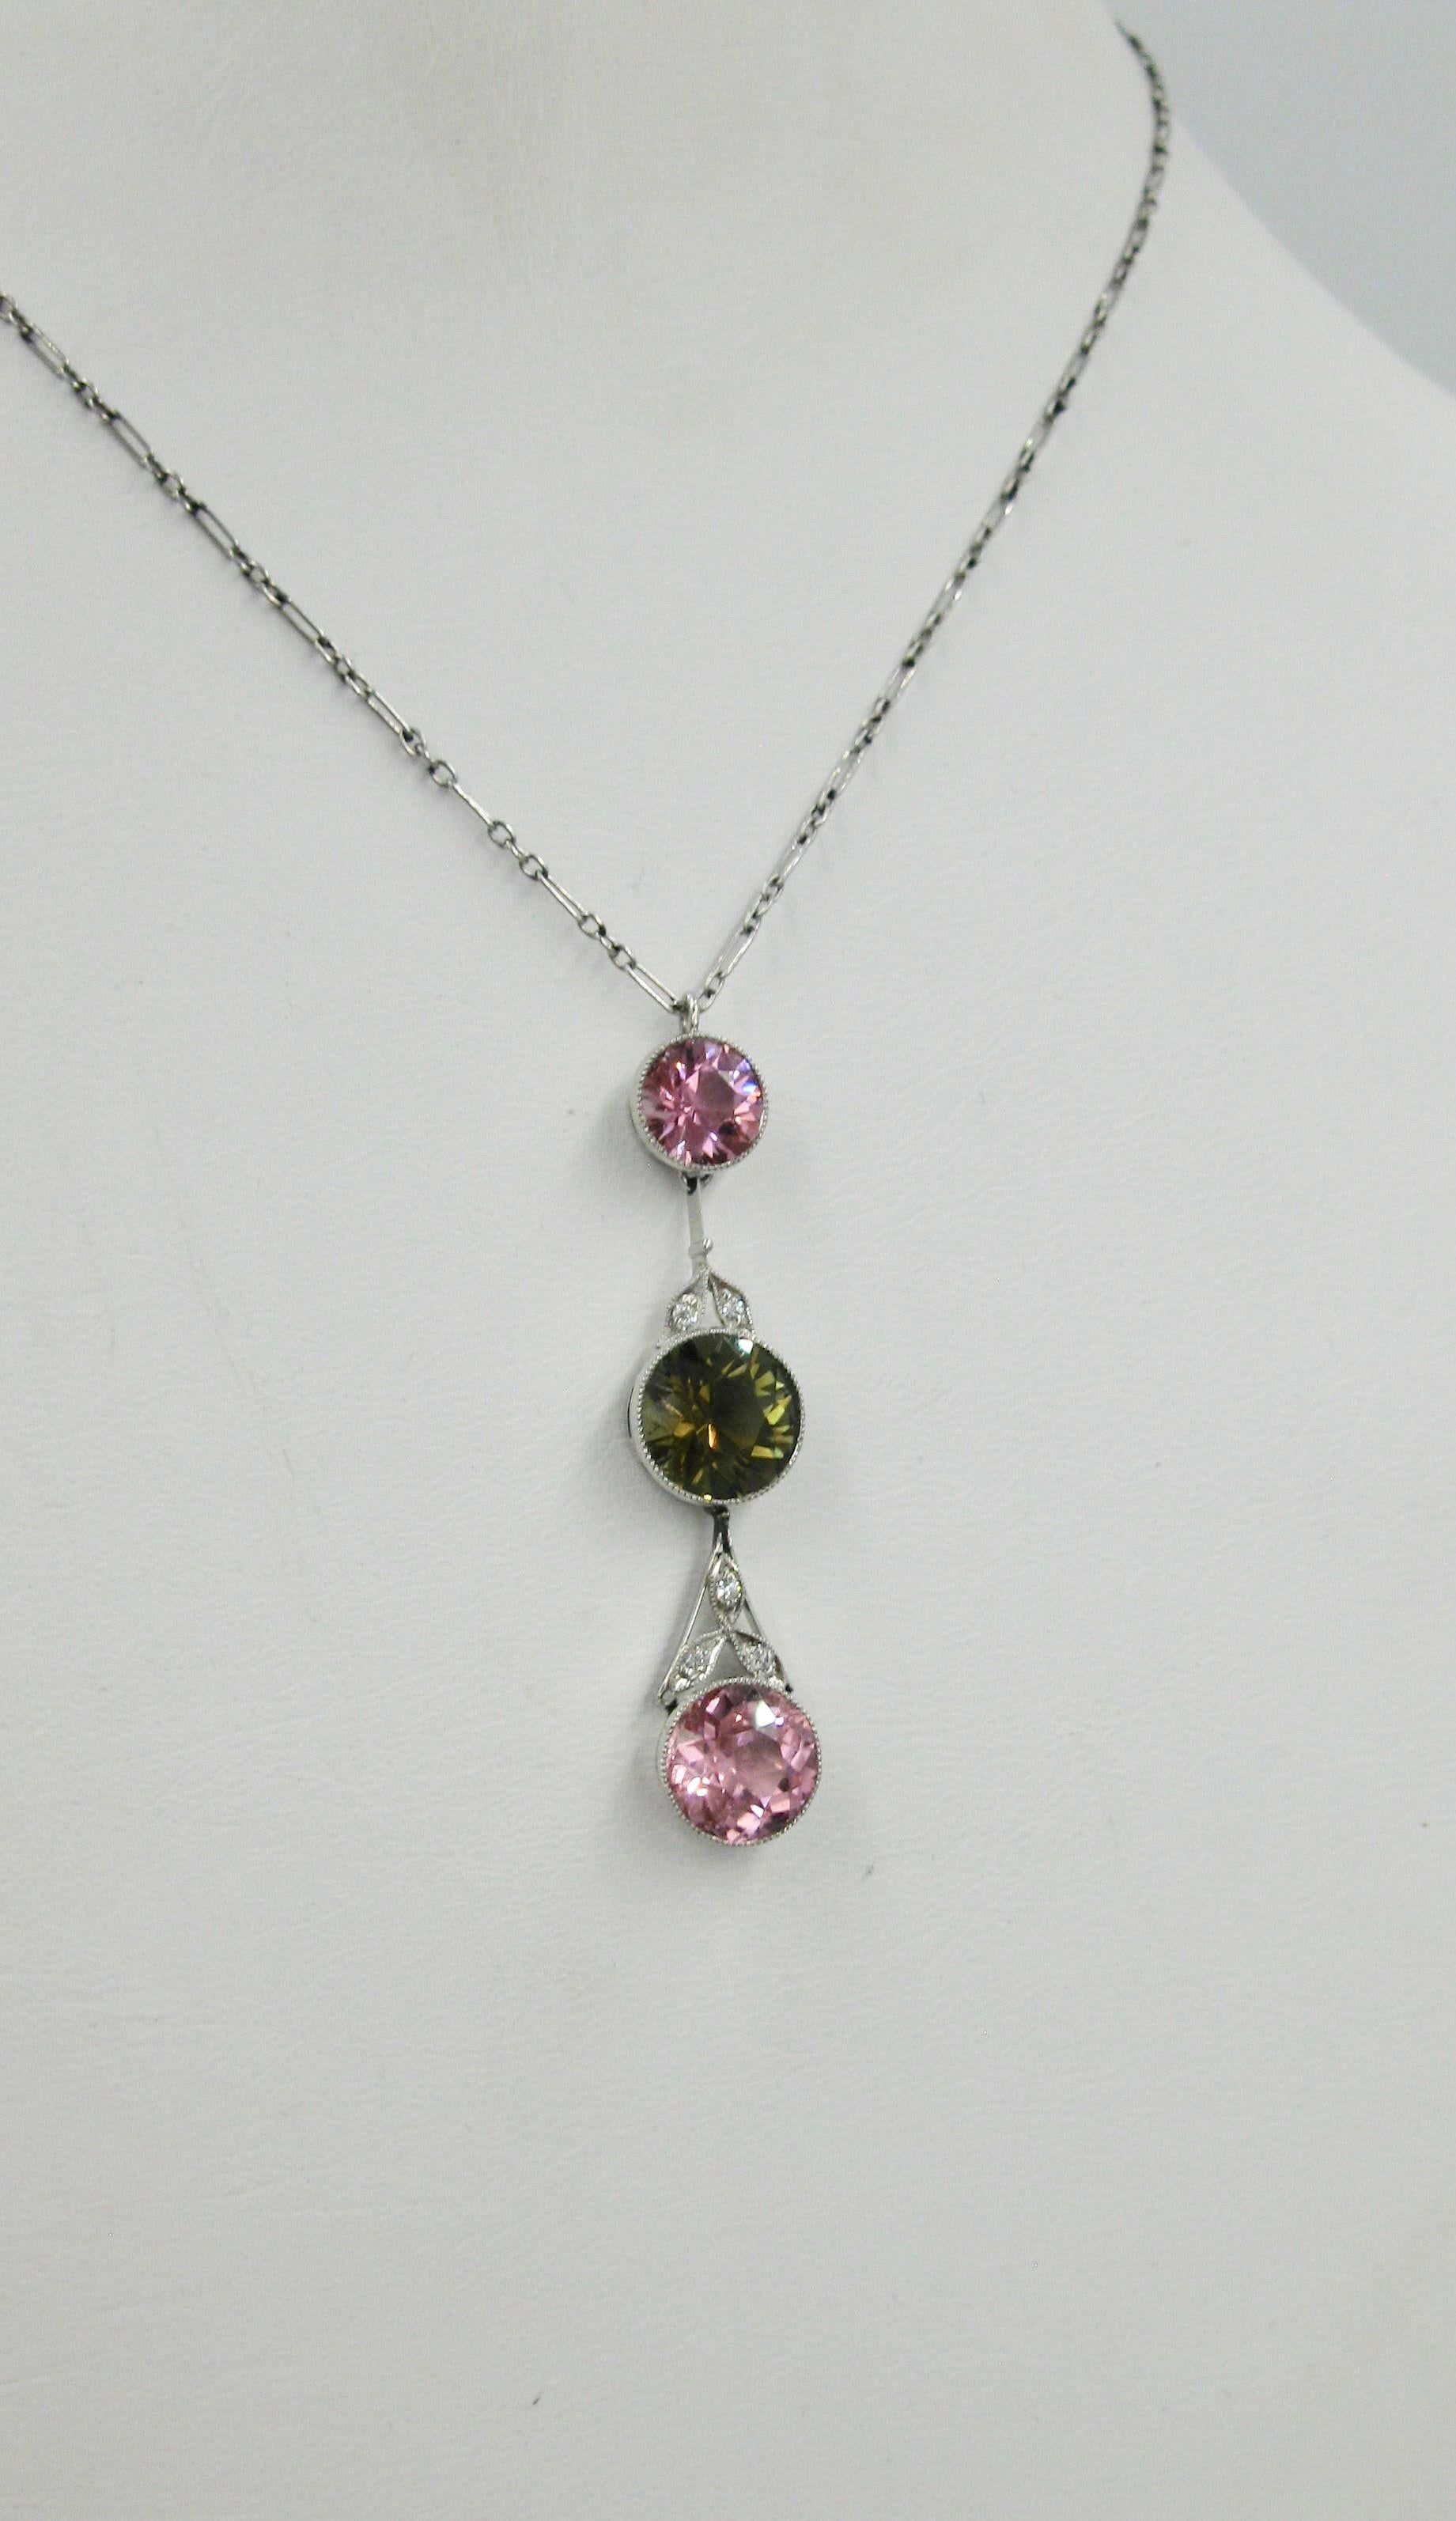 This is an exceptional and very rare Edwardian to Art Deco Necklace set with Pink and Green Tourmaline Gems of Great Beauty with Old European Cut Diamonds in a Platinum Pendant on a Platinum chain.  The combination of the pink and green tourmalines,